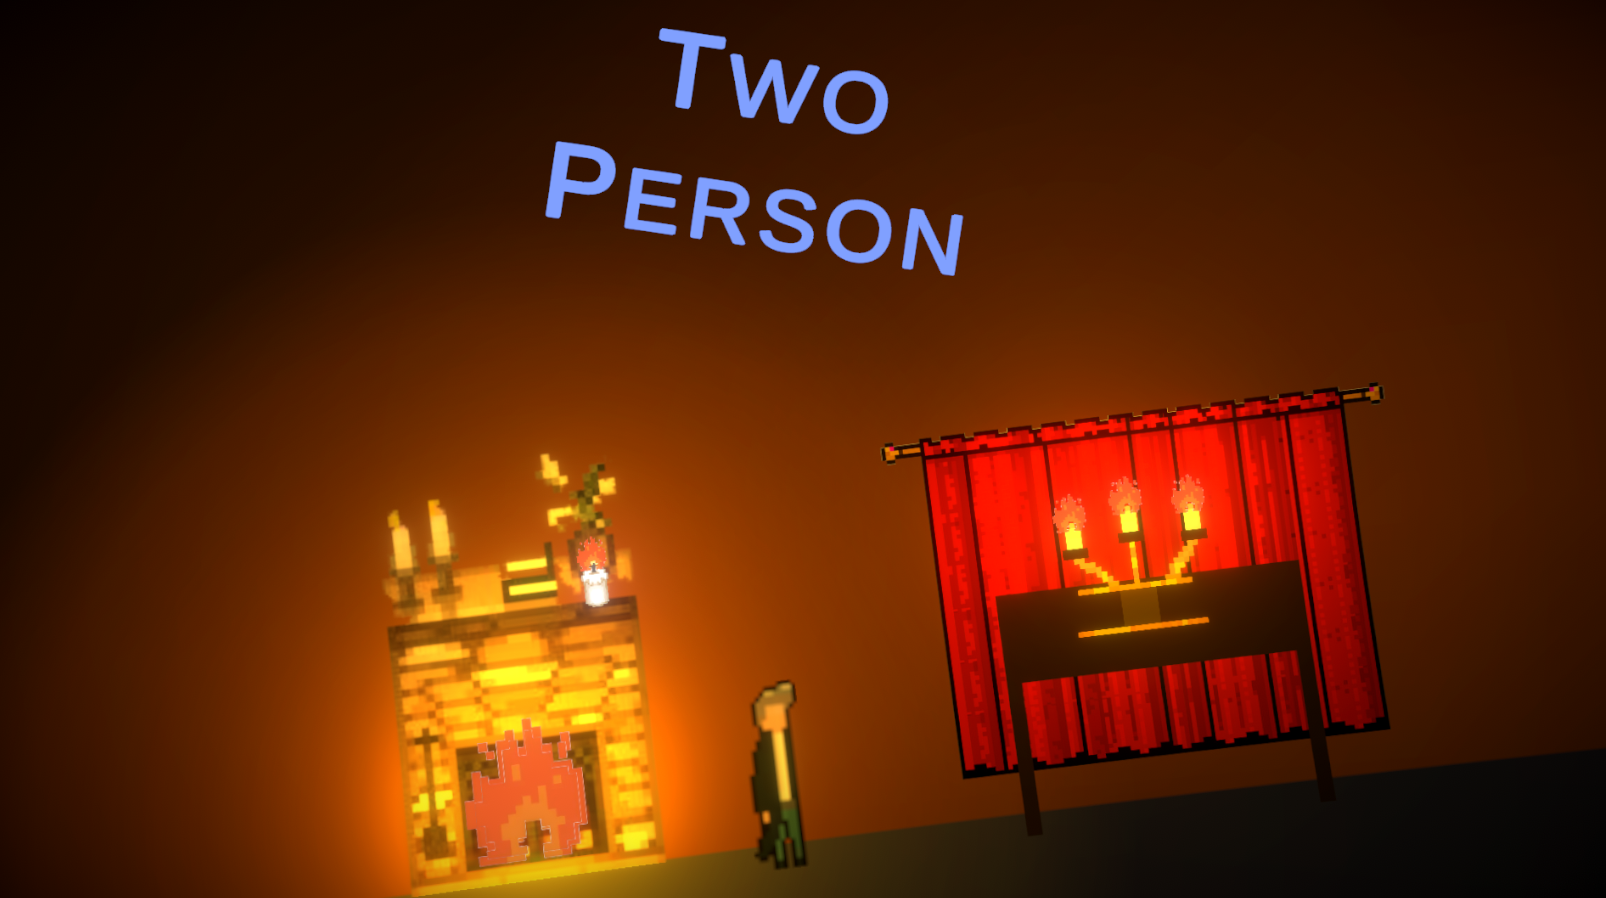 Two Person